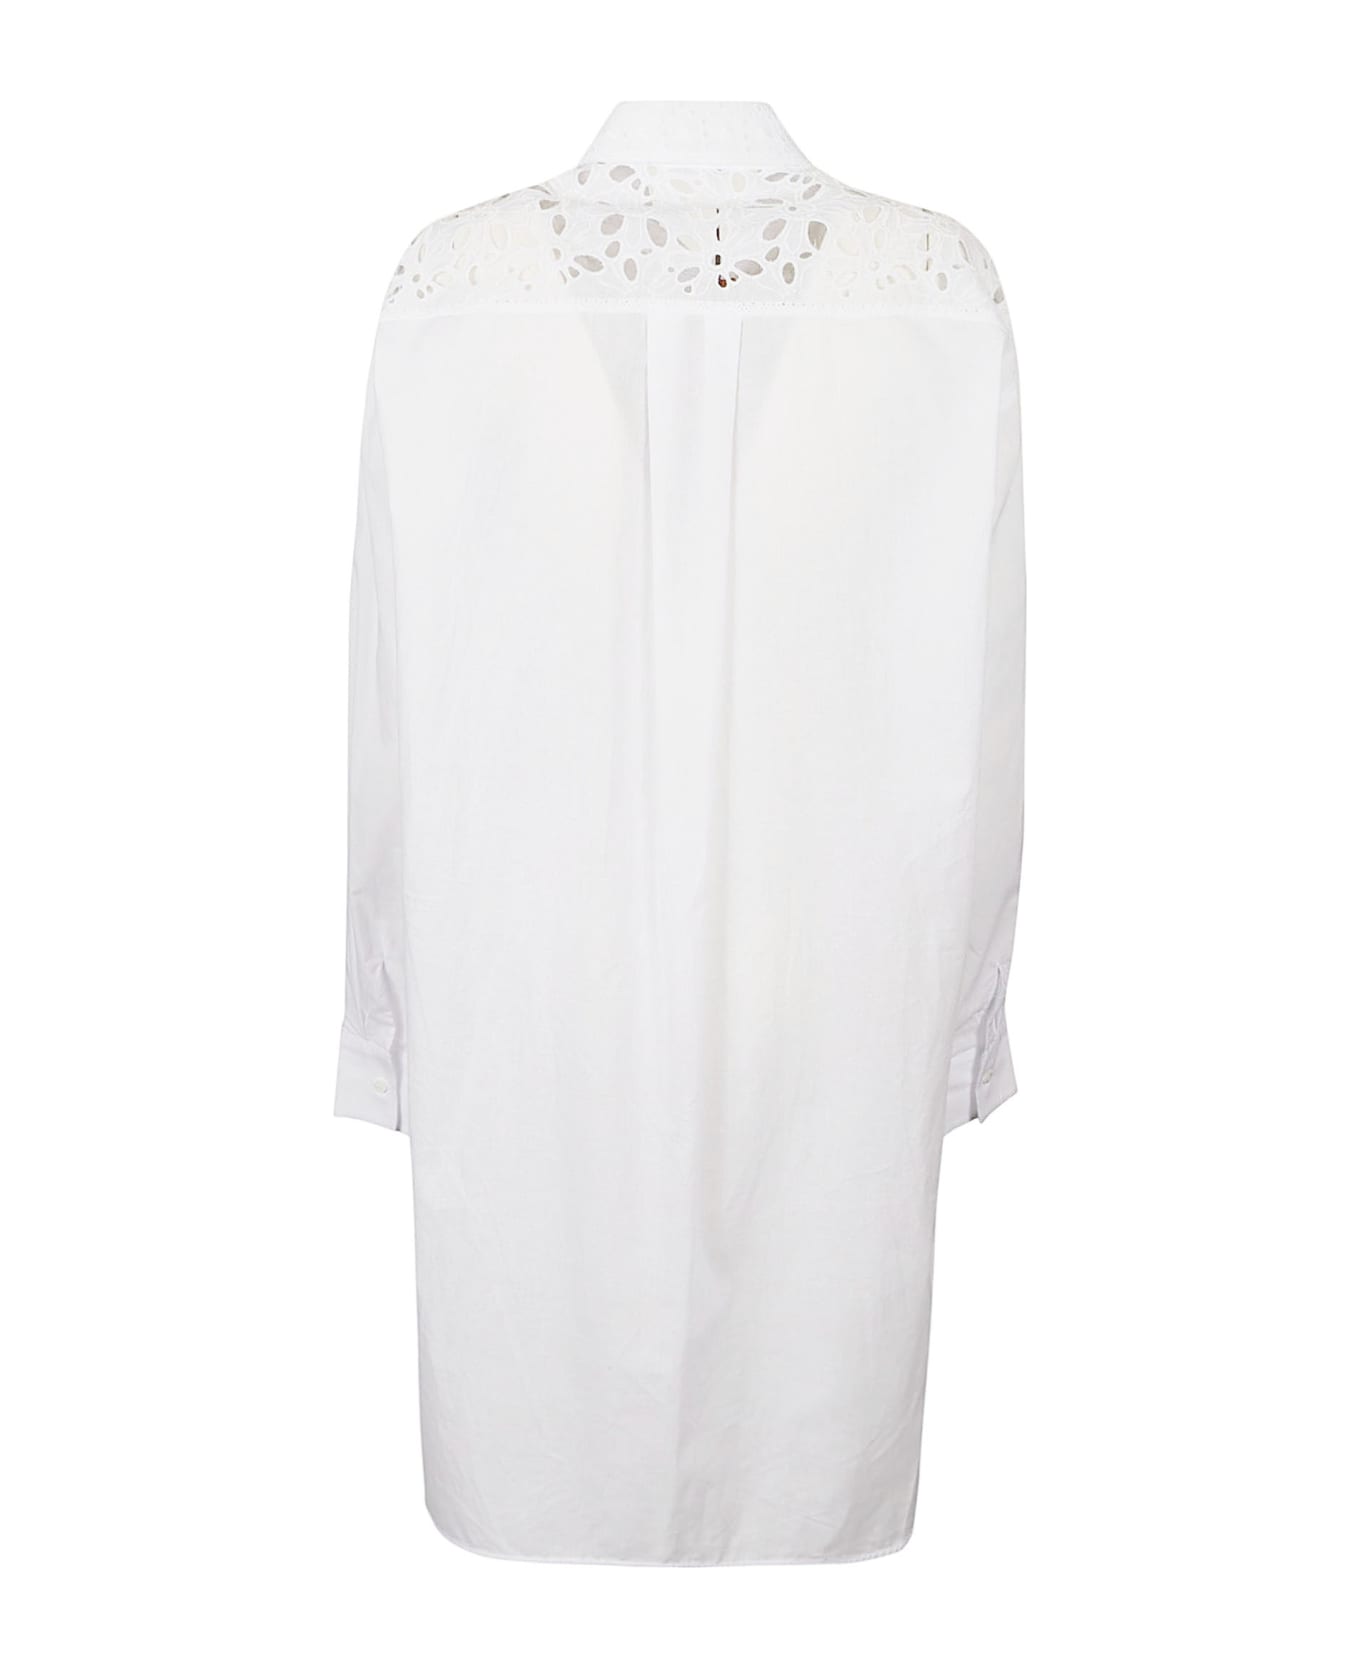 Ermanno Scervino Floral Perforated Oversized Shirt - Bright White シャツ